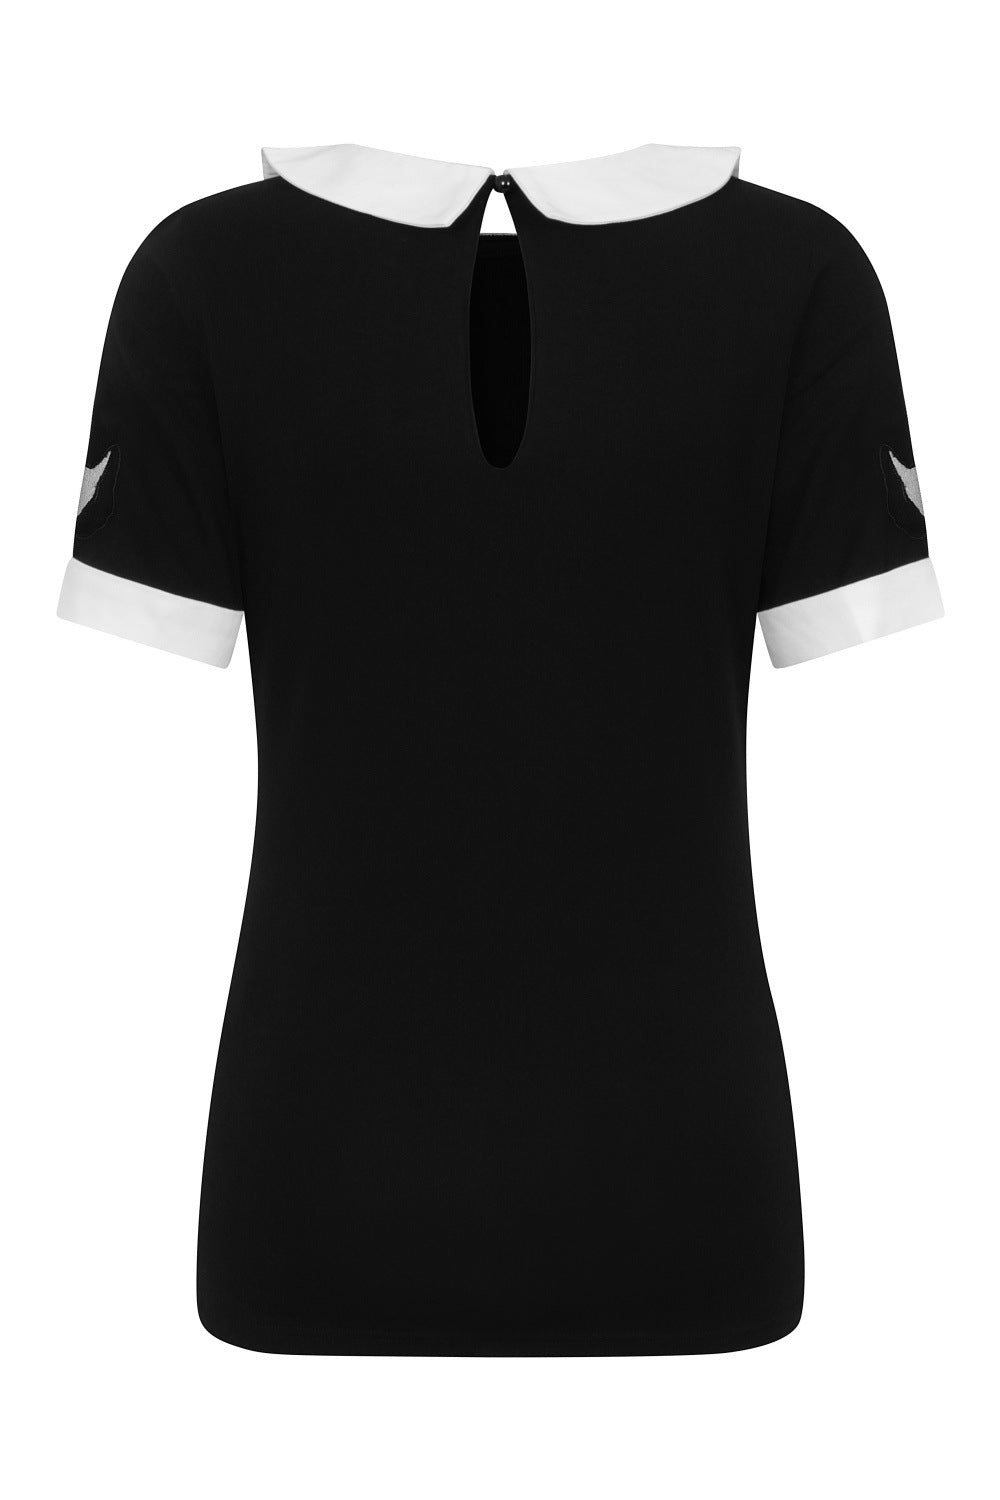 Black short sleeved top with white collar and sleeve cuffs. Cat head mesh panel on the sleeves.